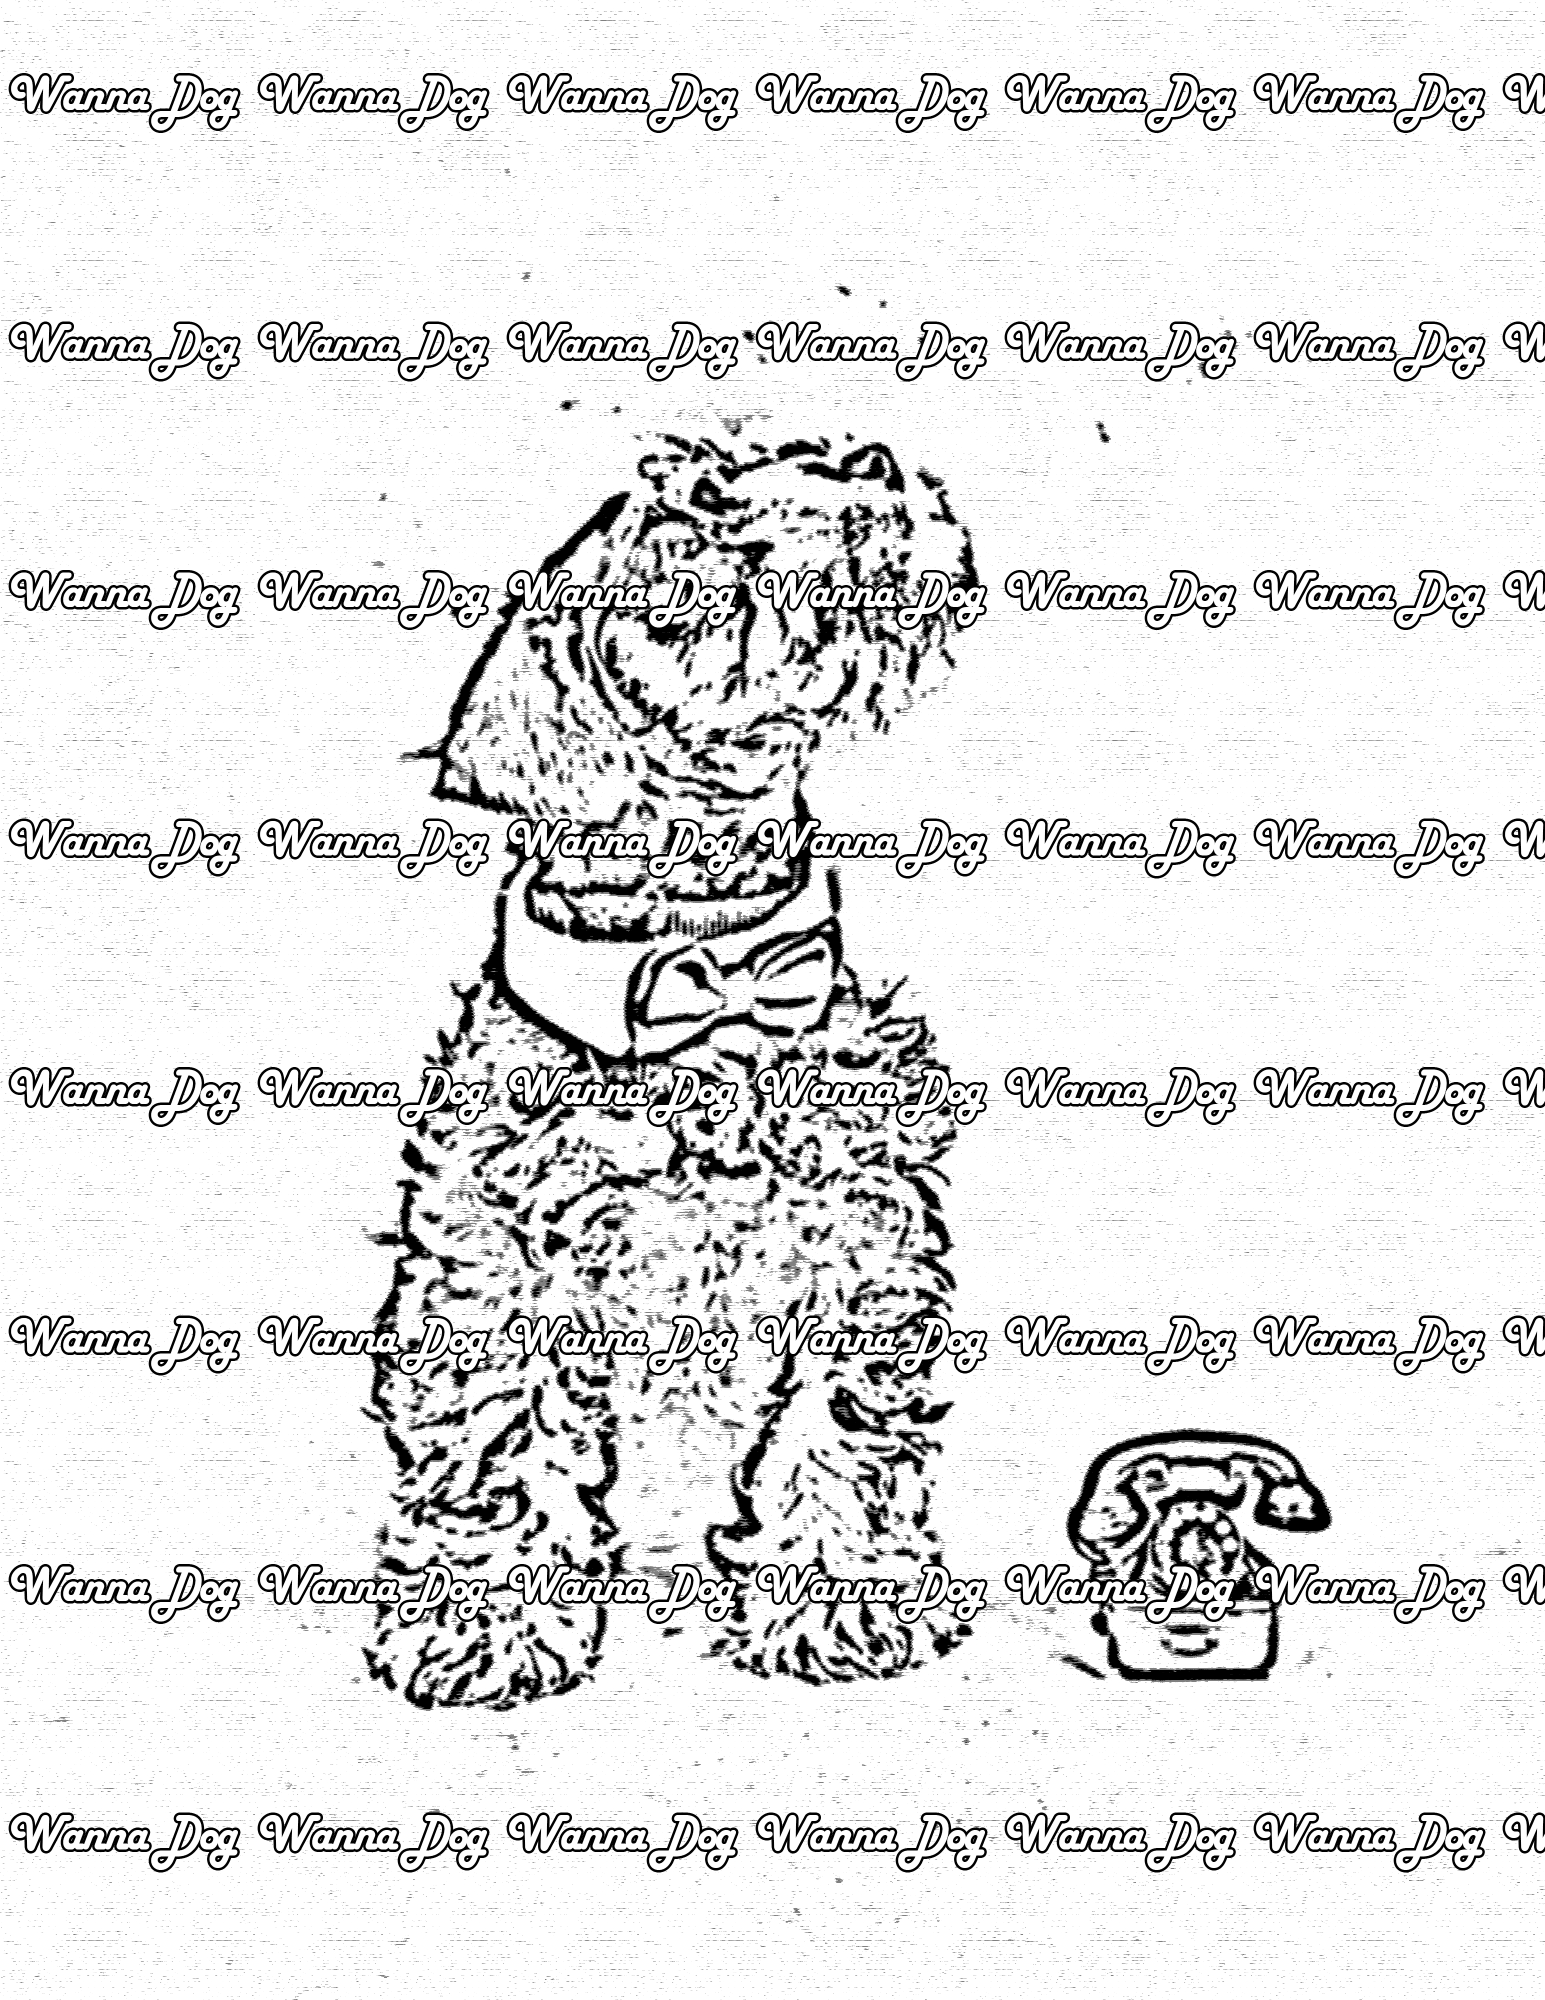 Schnauzer Coloring Page of a Schnauzer wearing a bowtie and ready to answer the phone